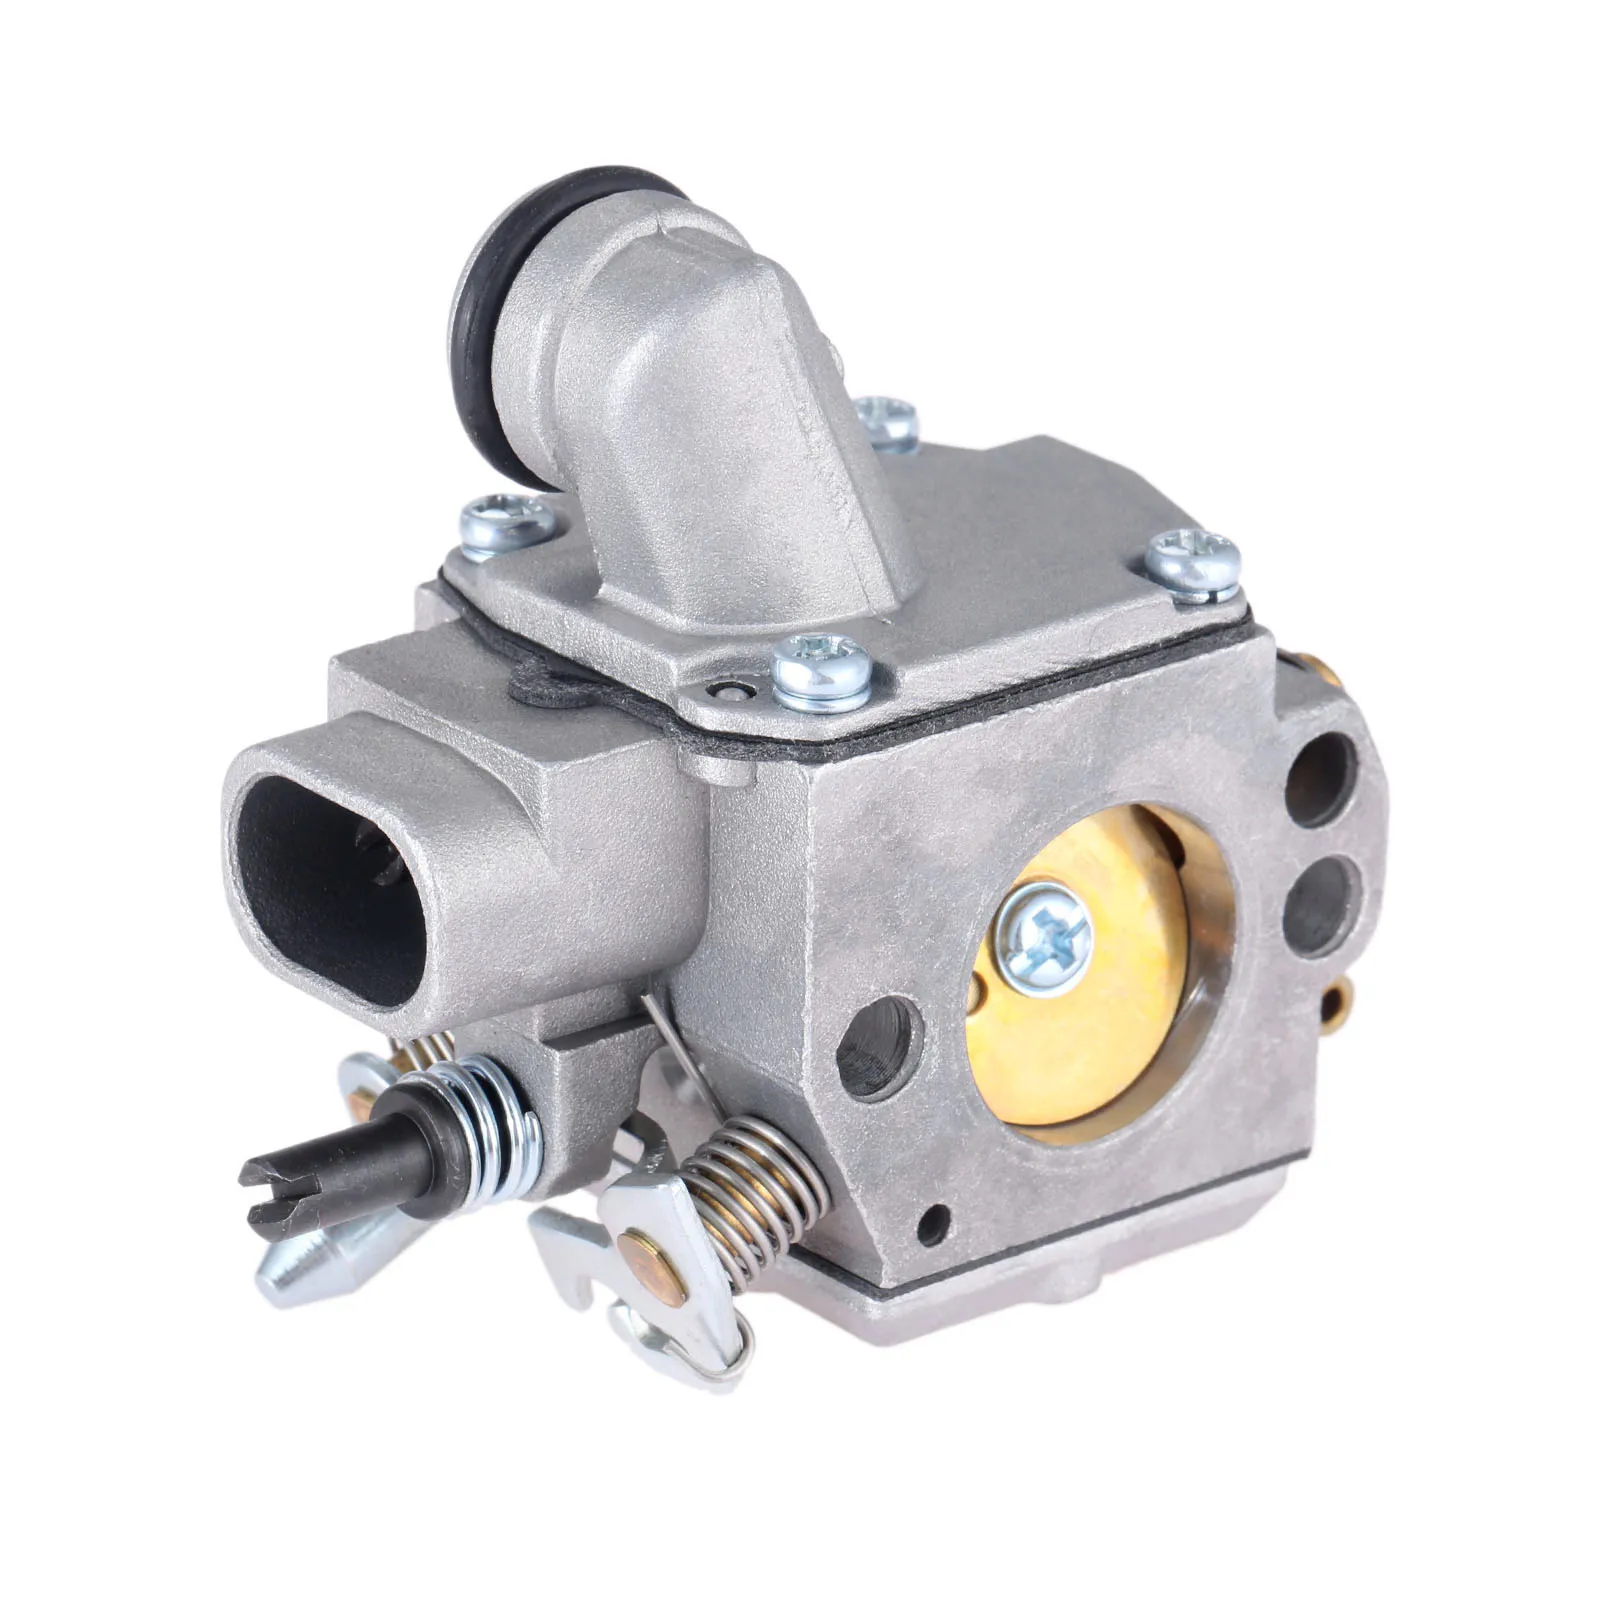 

ms361 Chainsaws Carburetor Carb fit For STIHL MS361 MS 361 Rep 1135 120 0601 Chainsaw Replacement 2-Stroke Garden Power Tools